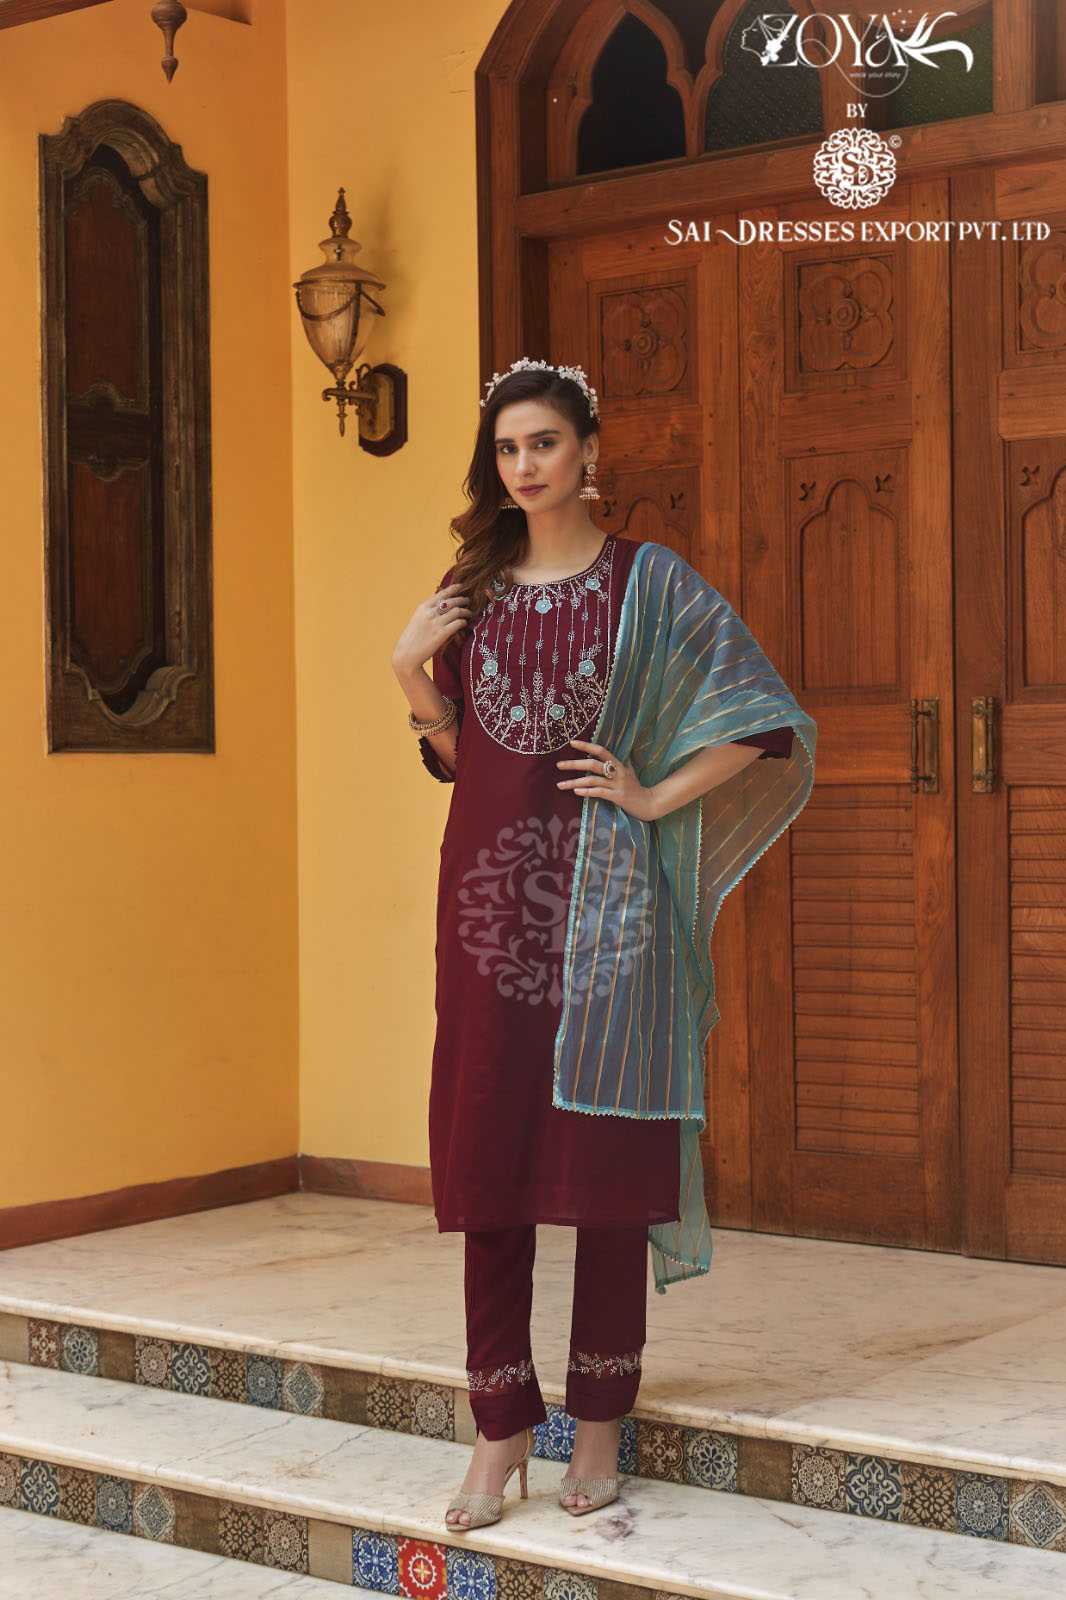 SAI DRESSES PRESENT MUSKAAN READY TO FESTIVE WEAR HANDWORK STRAIGHT CUT KURTI WITH PANT STYLE DESIGNER 3 PIECE SUITS IN WHOLESALE RATE IN SURAT